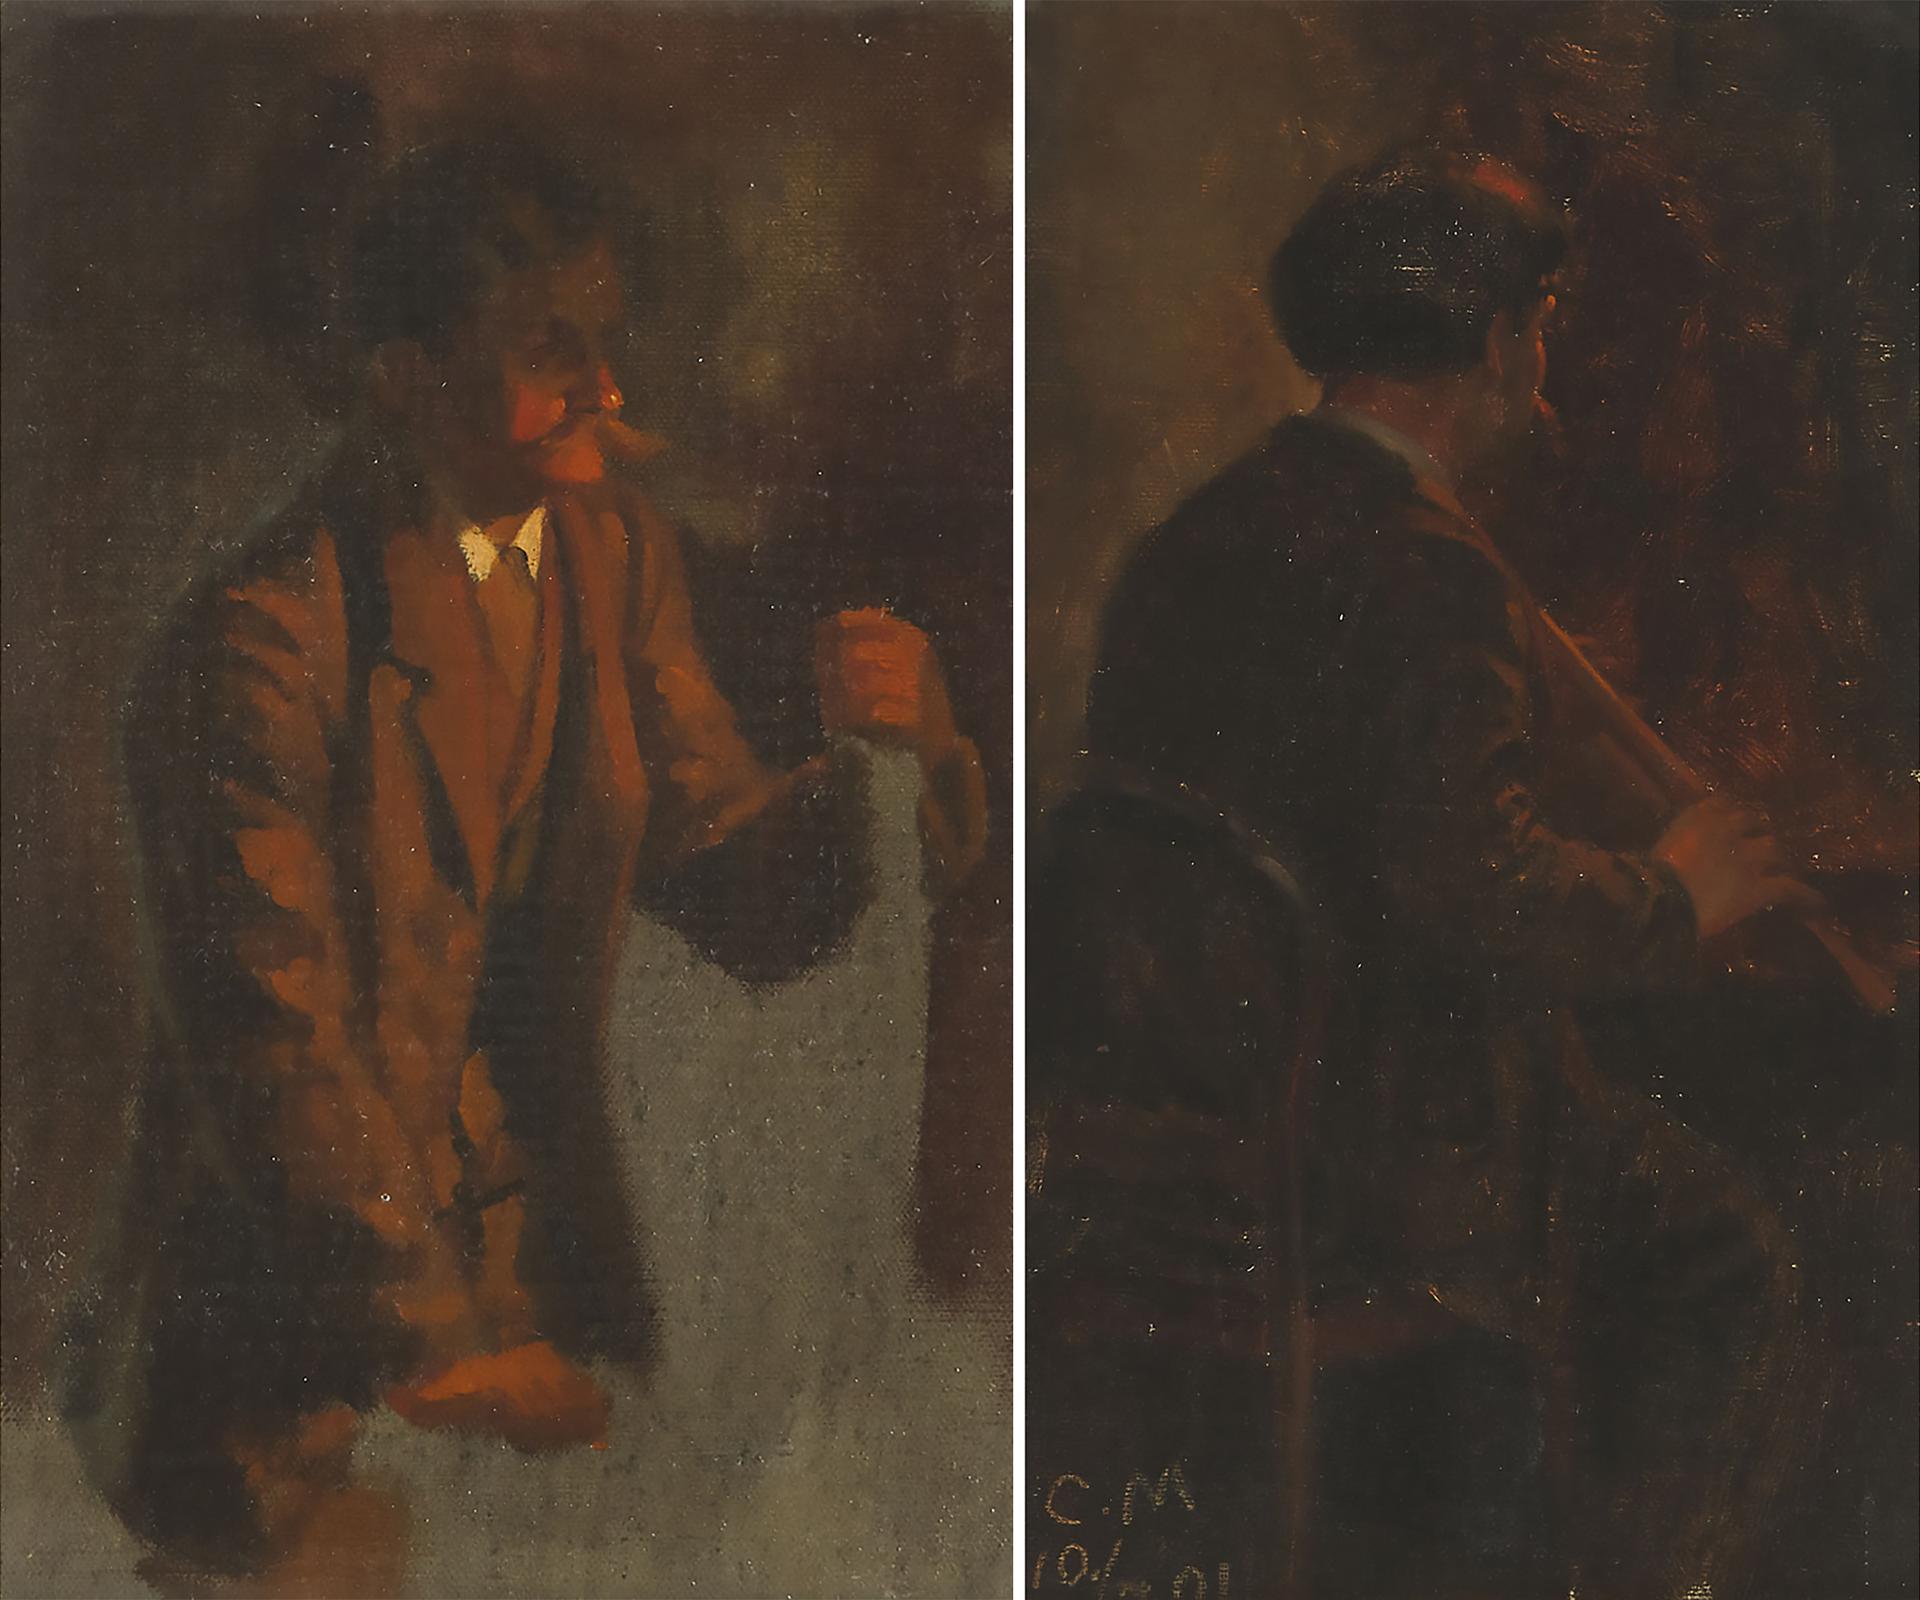 Karl (Carl) Mummert - Man With Moustache Standing; Man With Moustache Playing A Flute, Circa 1901